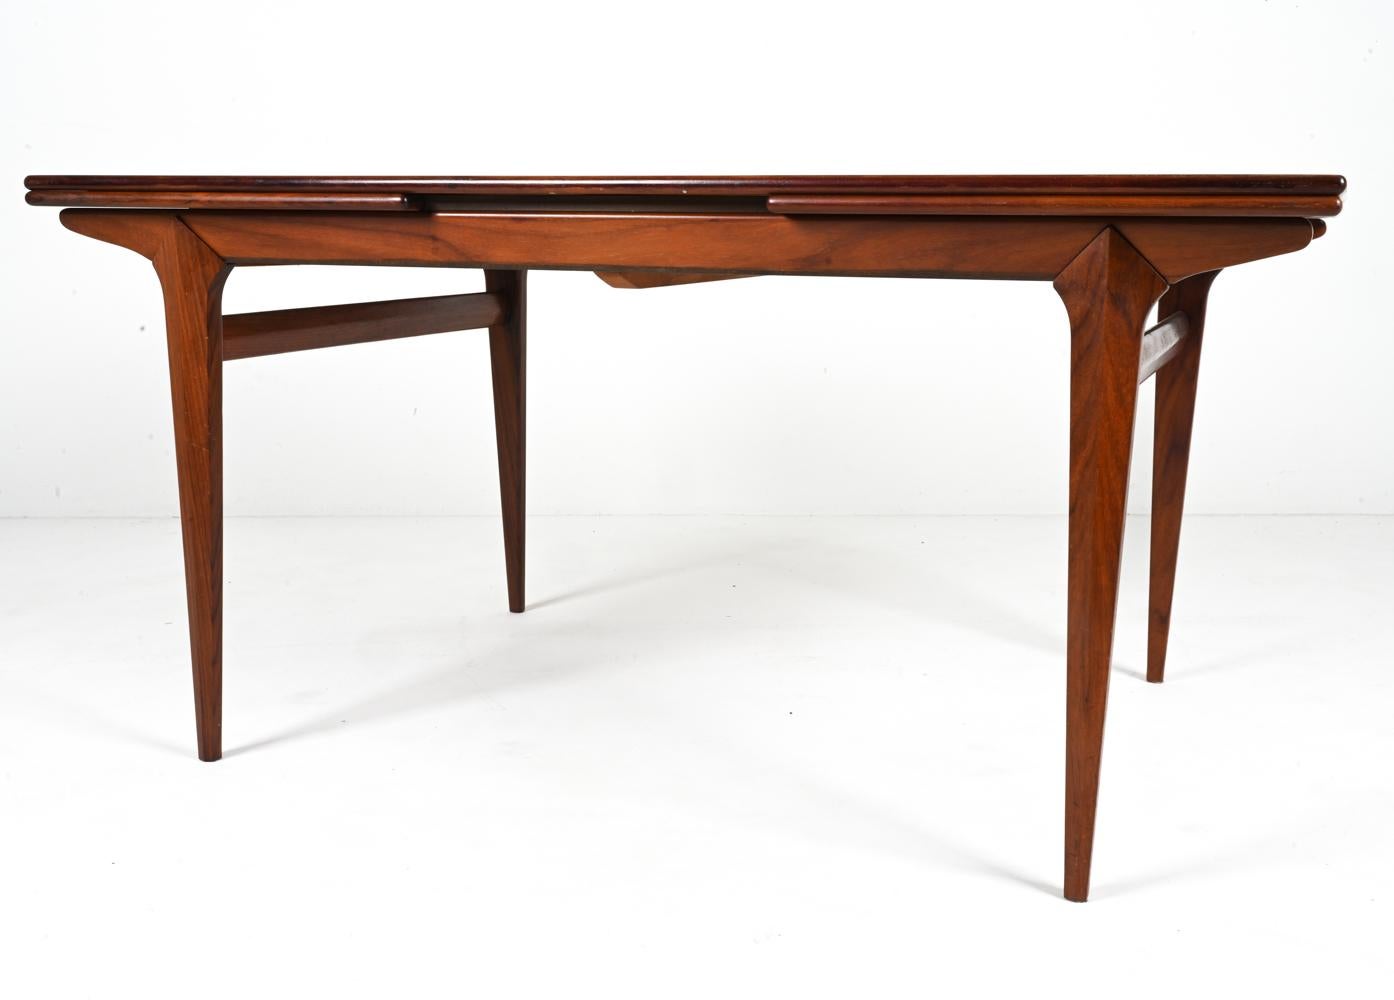 The Johannes Andersen Extension Table in Mahogany epitomizes the sophisticated fusion of craftsmanship and design innovation. Crafted by the Danish designer Johannes Andersen, this dining table showcases the timeless elegance and functionality